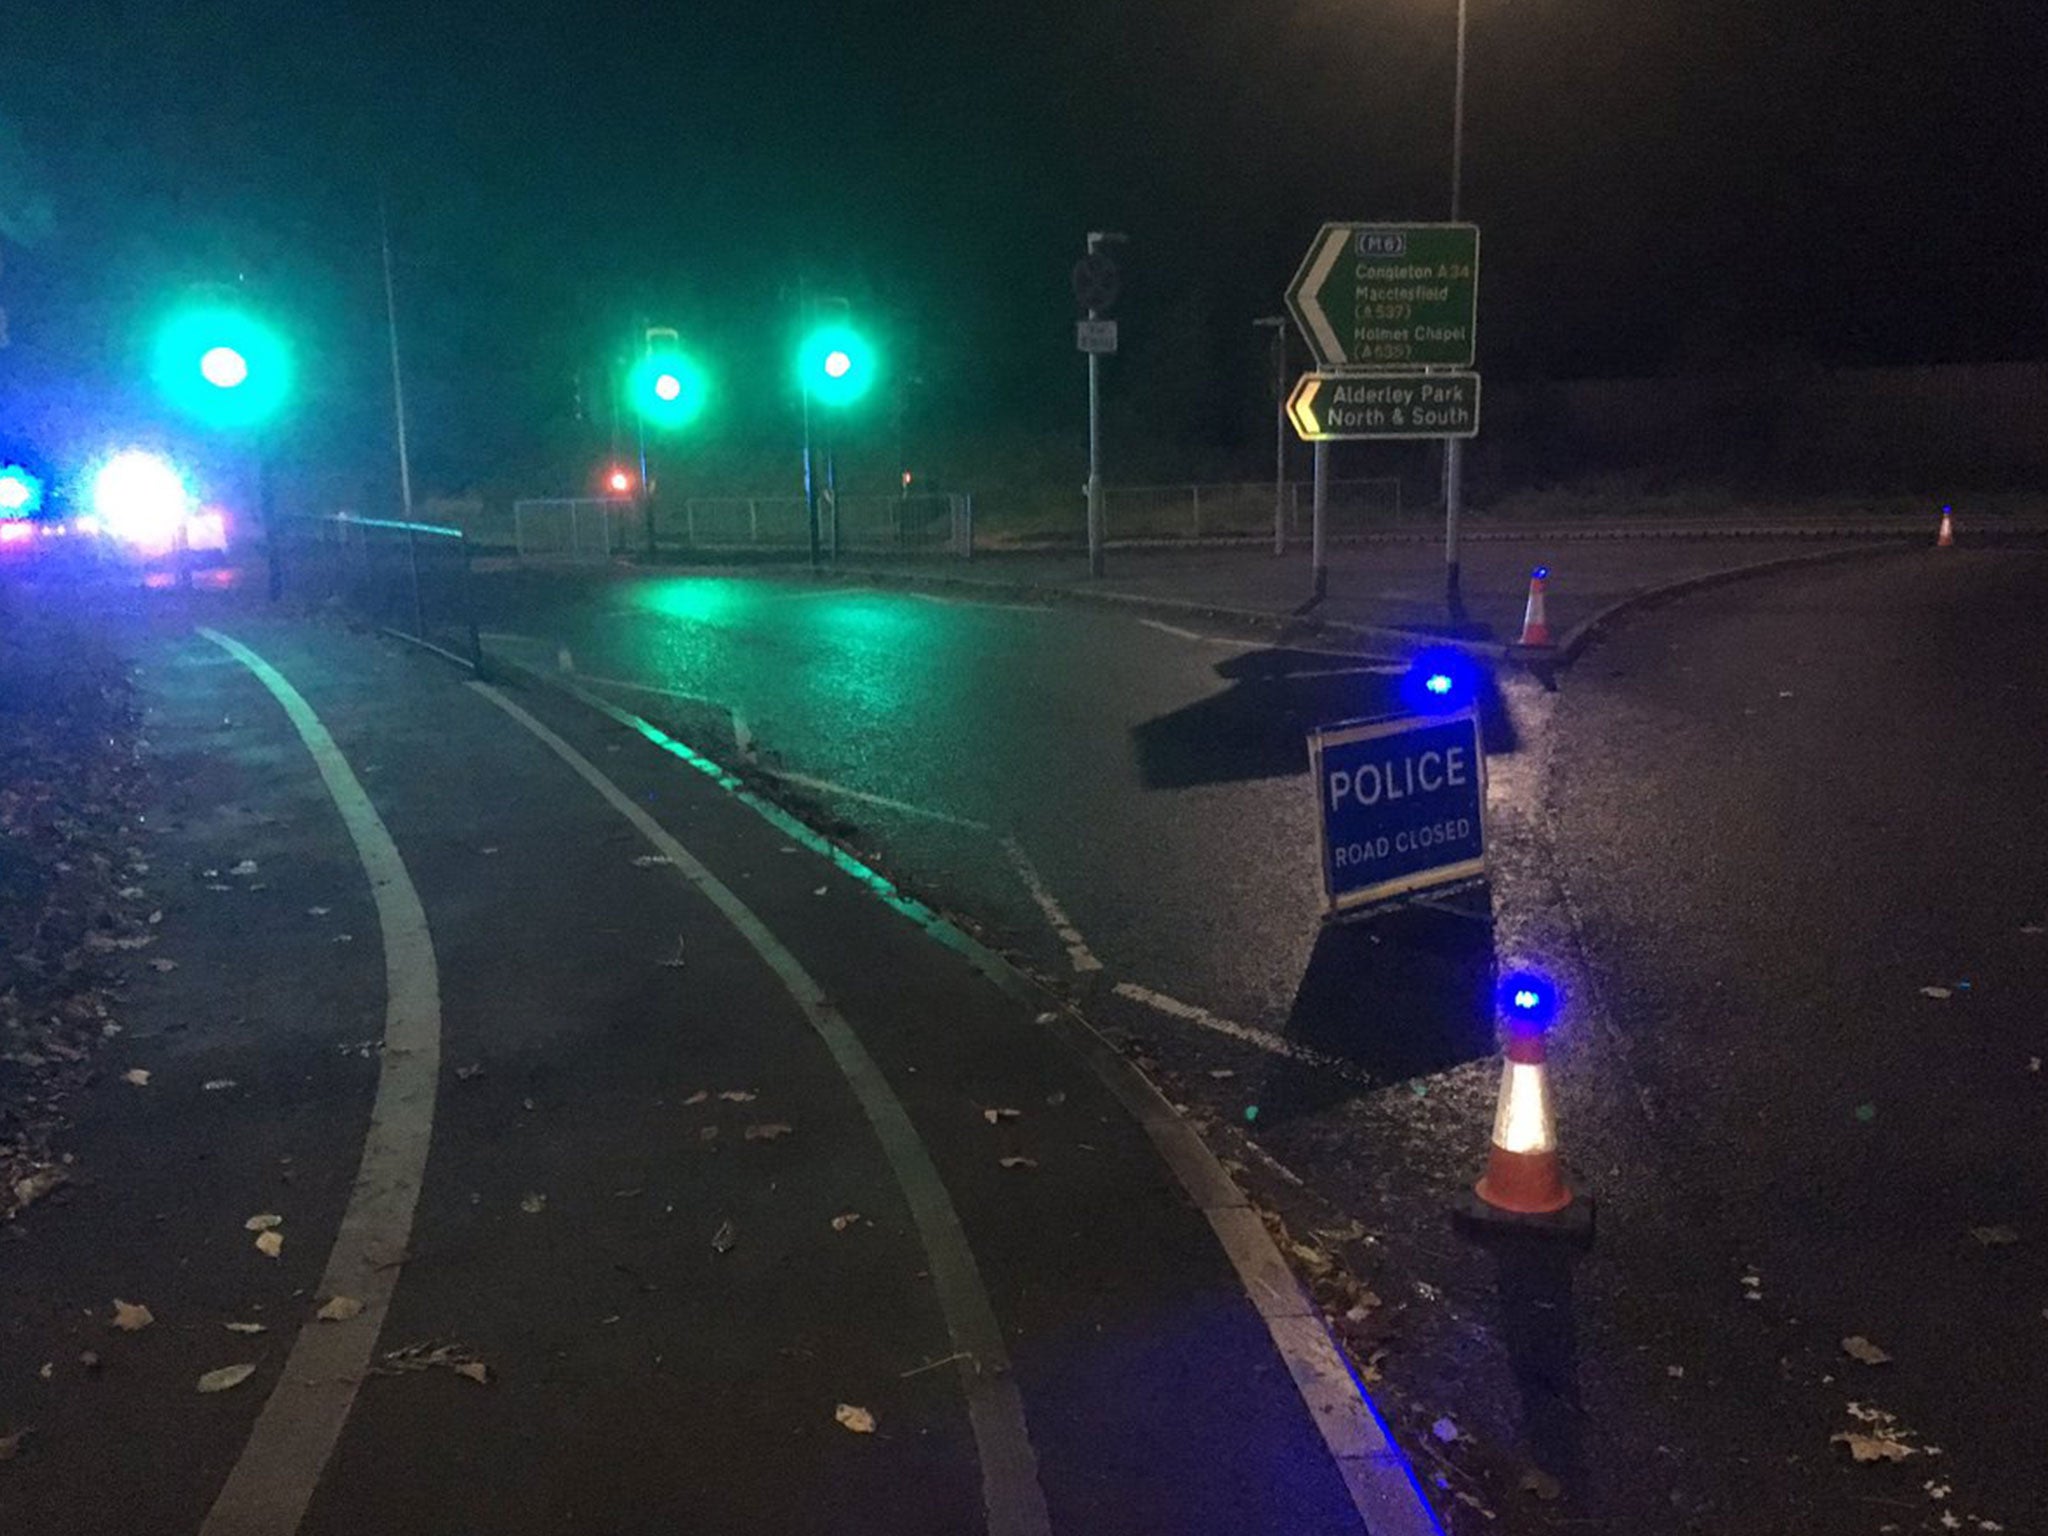 Two people were killed and a further nine injured after a crash involving a minibus and a car in Cheshire on Sunday morning